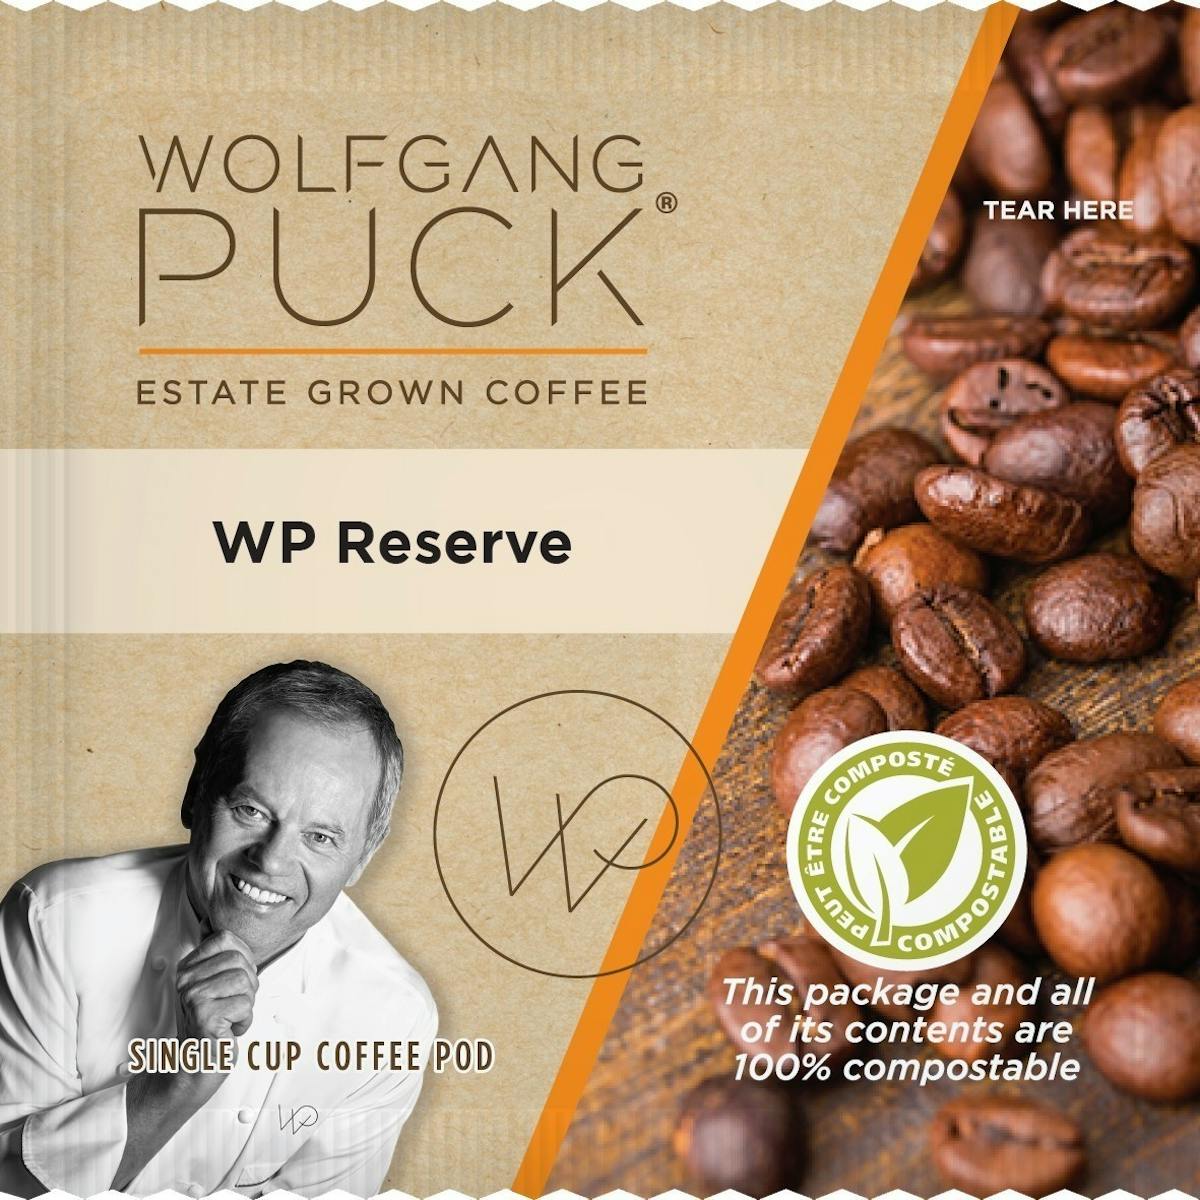 Each Individually wrapped pod contains fresh roasted, delicious coffee. The package and all of its content are 100% compostable. Over 20 varieties available.